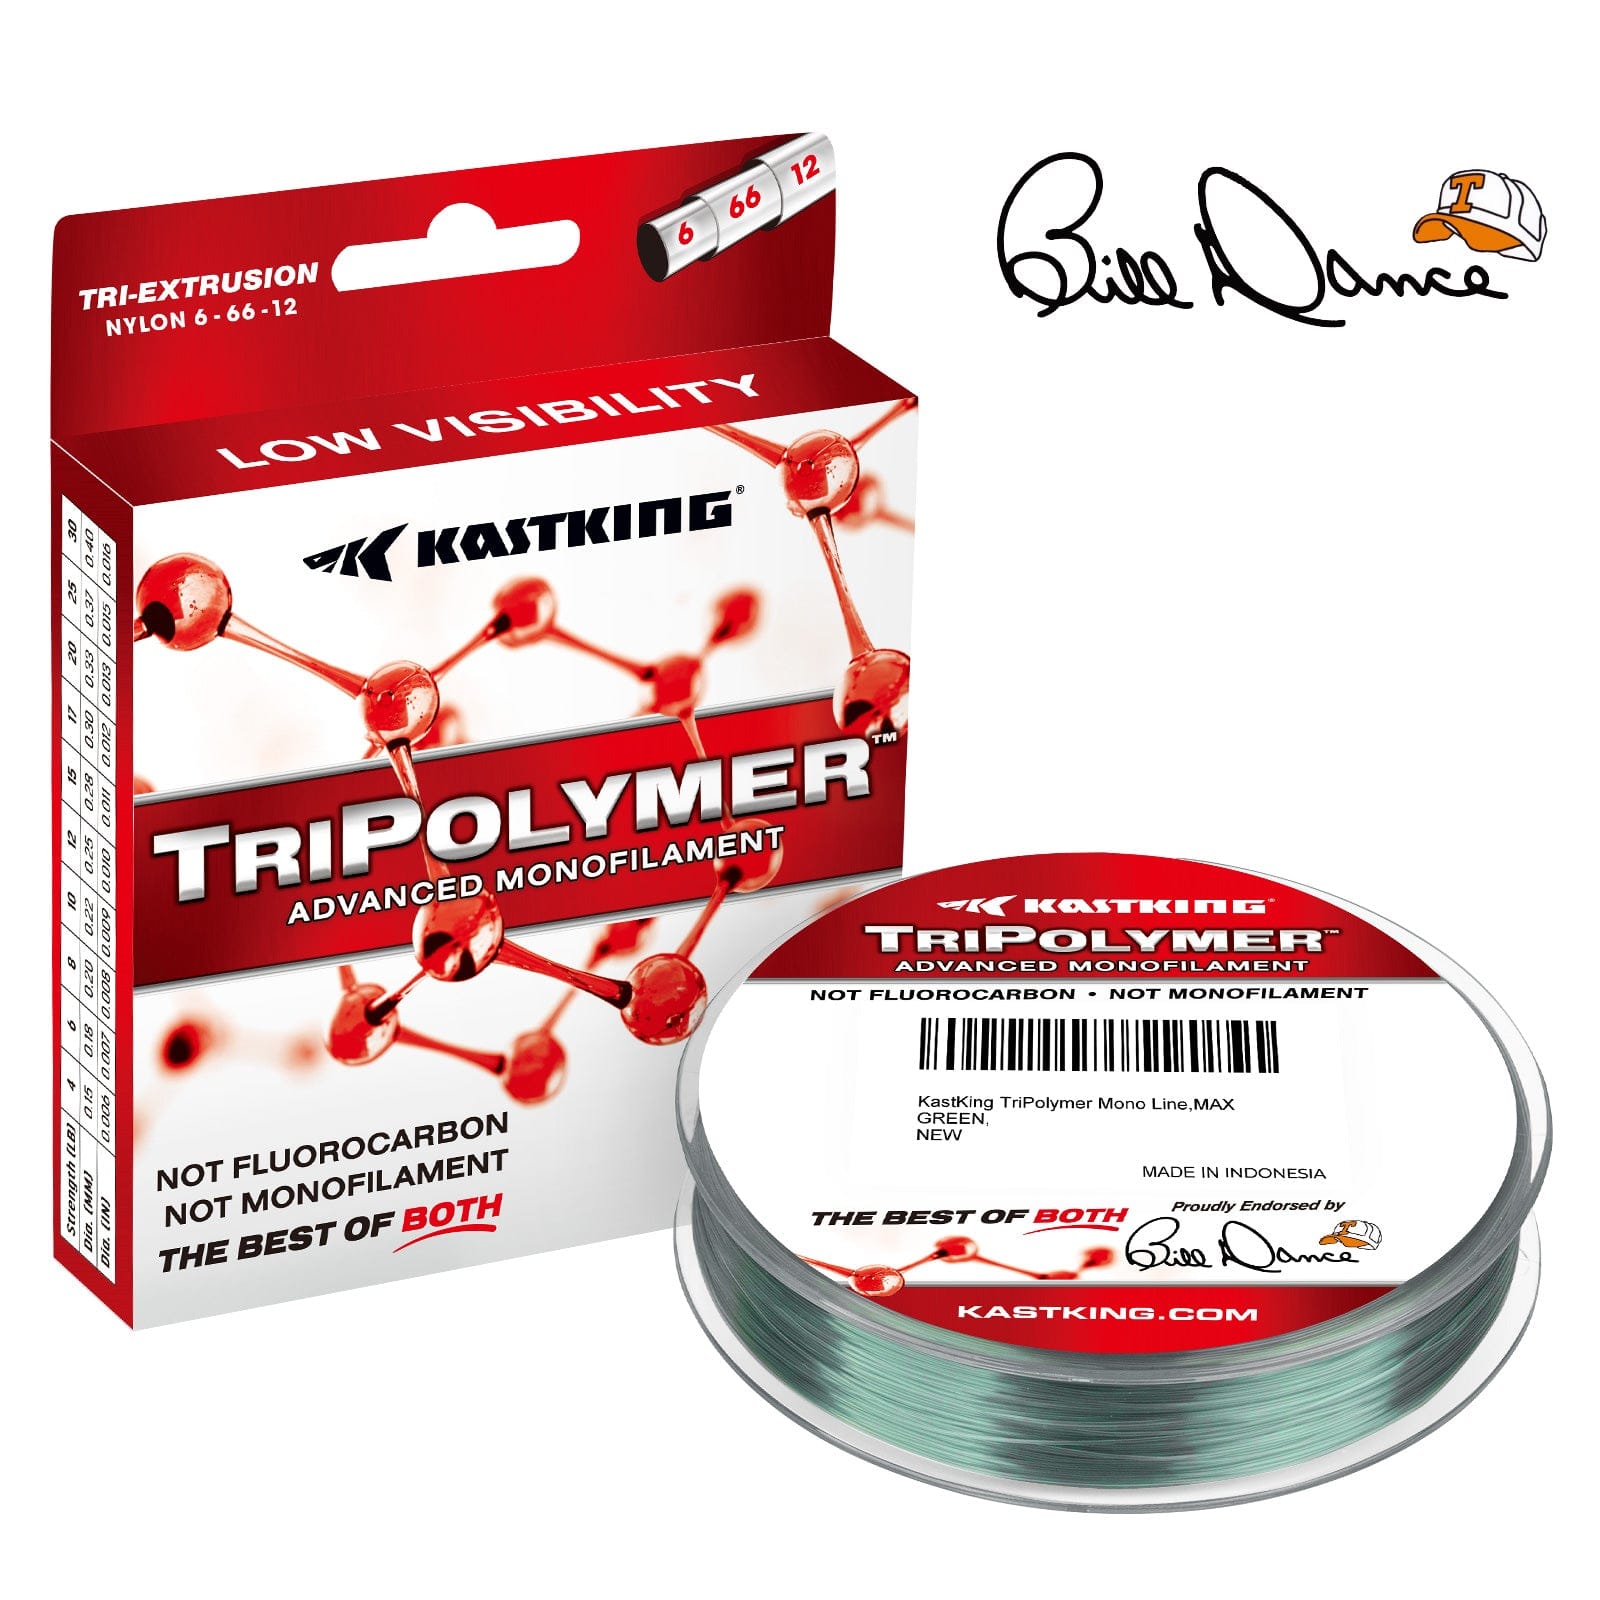 KastKing Destron Complete Braided Fishing Line and Leader, TriPolymer  Advanced Monofilament & Kovert Xtreme Fluorocarbon Leader, Convenient Spool  with